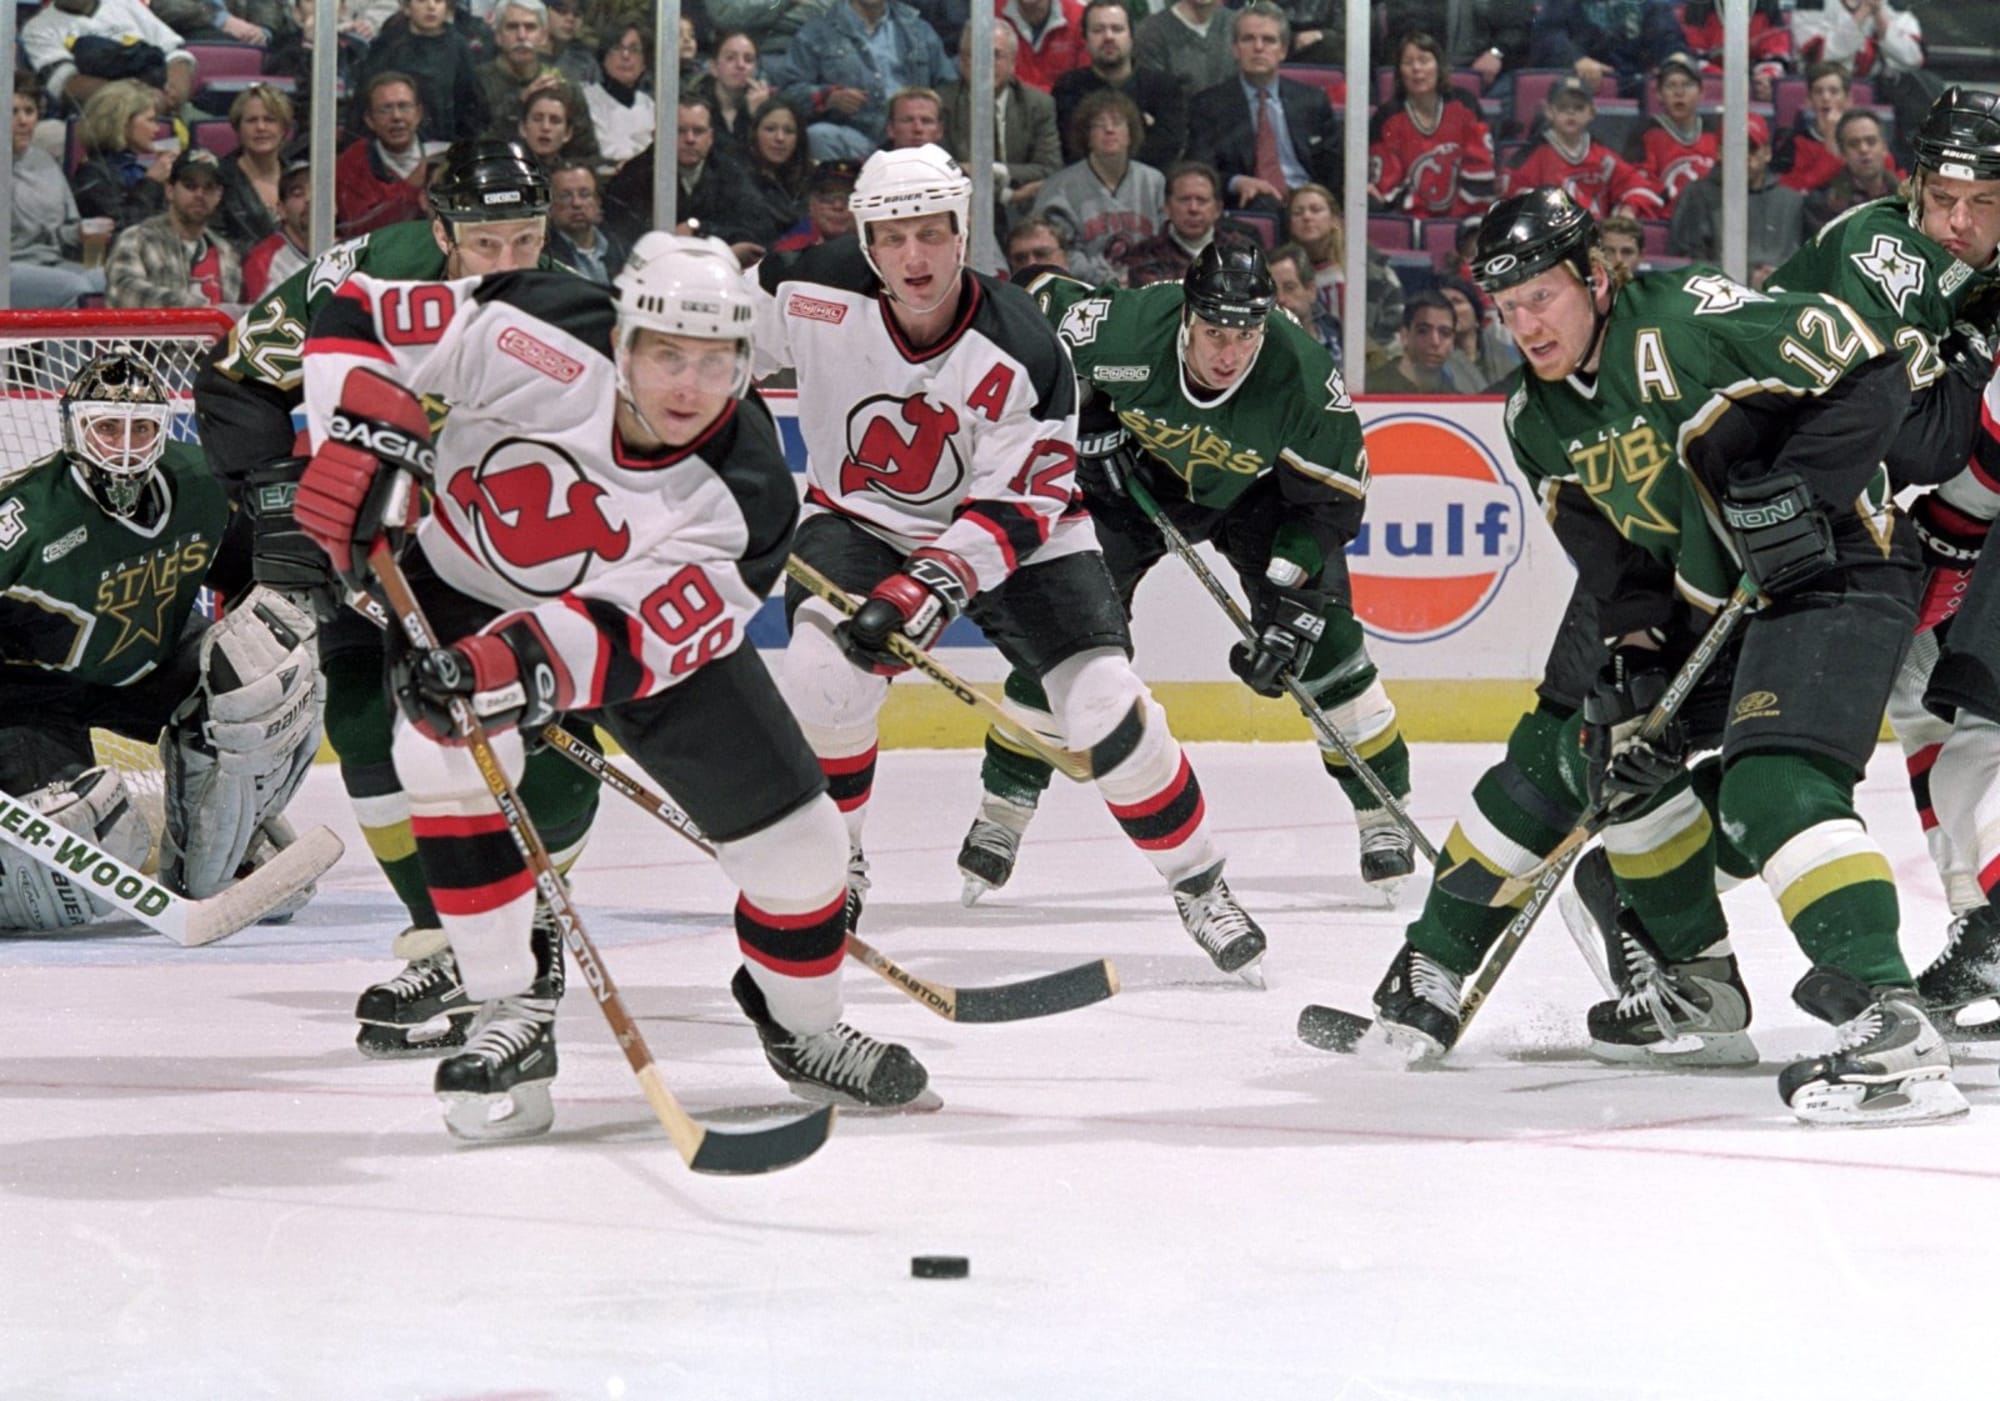 Mogilny not headed to the Hockey Hall of Fame this year